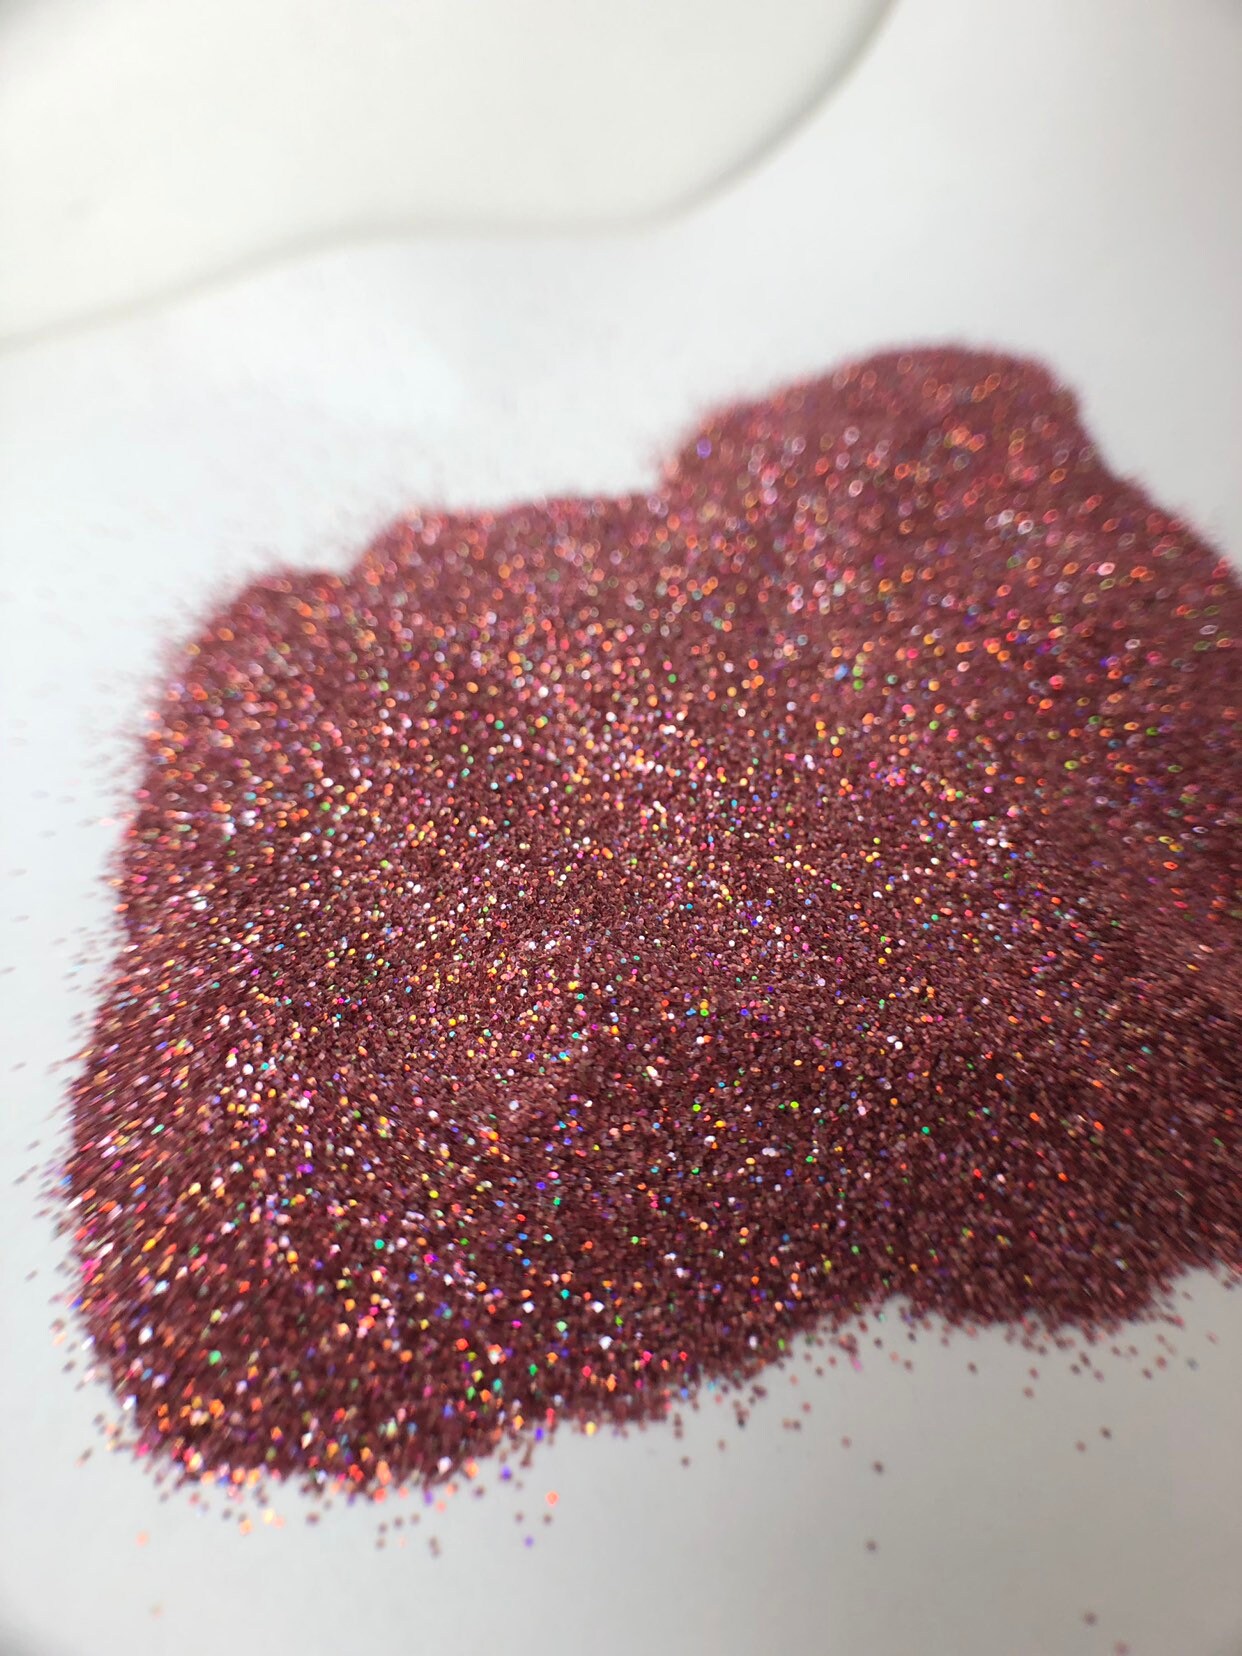 Fine Holographic Glitter for Arts and Crafts, 1 lb Plus Bulk Available in  22 Colors (Orange)